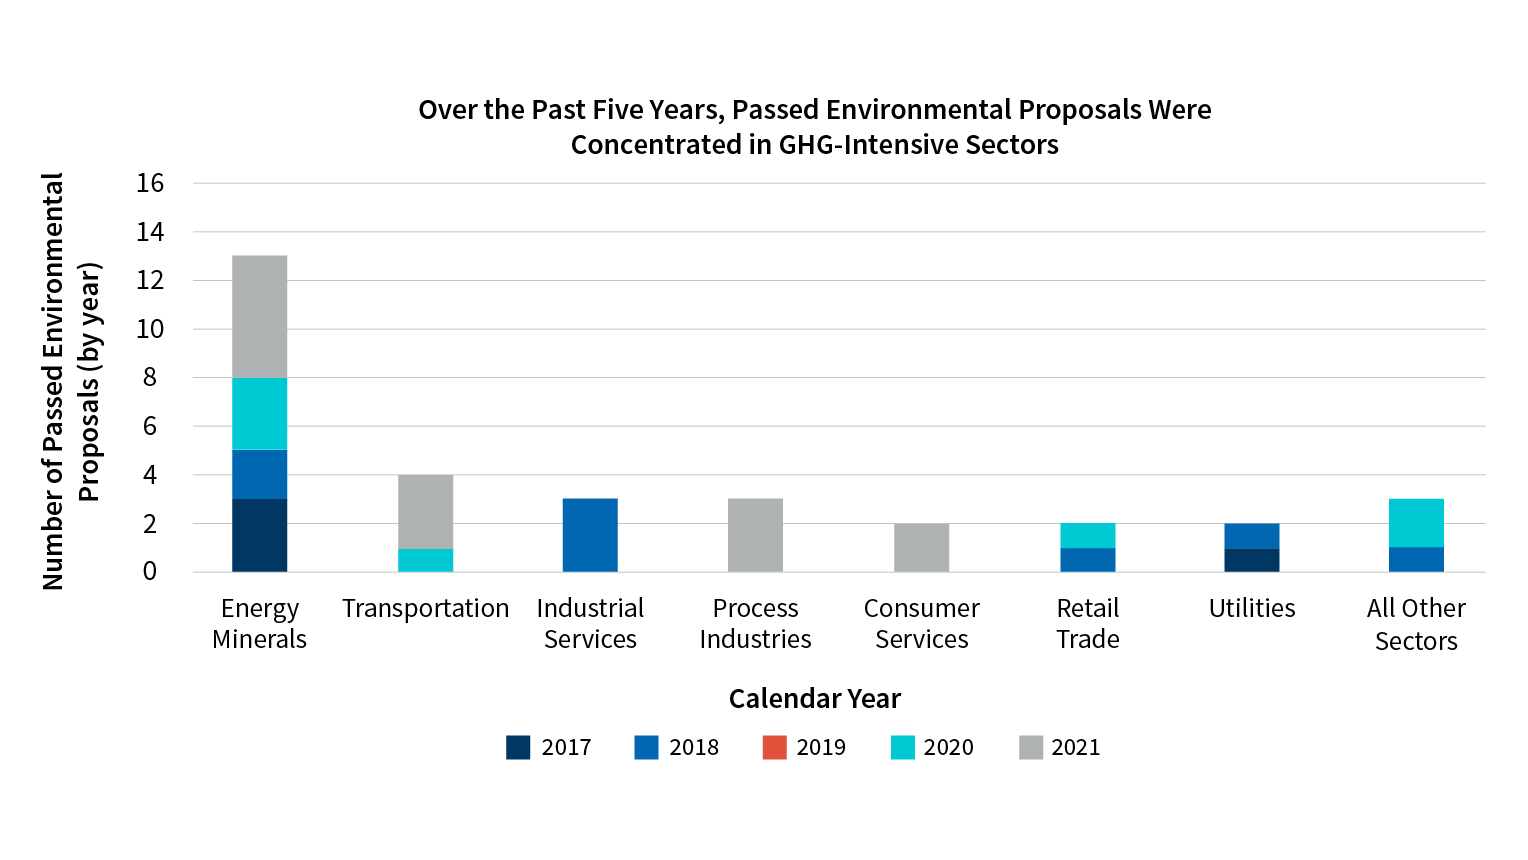 Over the Past Five Years, Passed Environmental Proposals Were Concentrated in GHG-Intensive Sectors